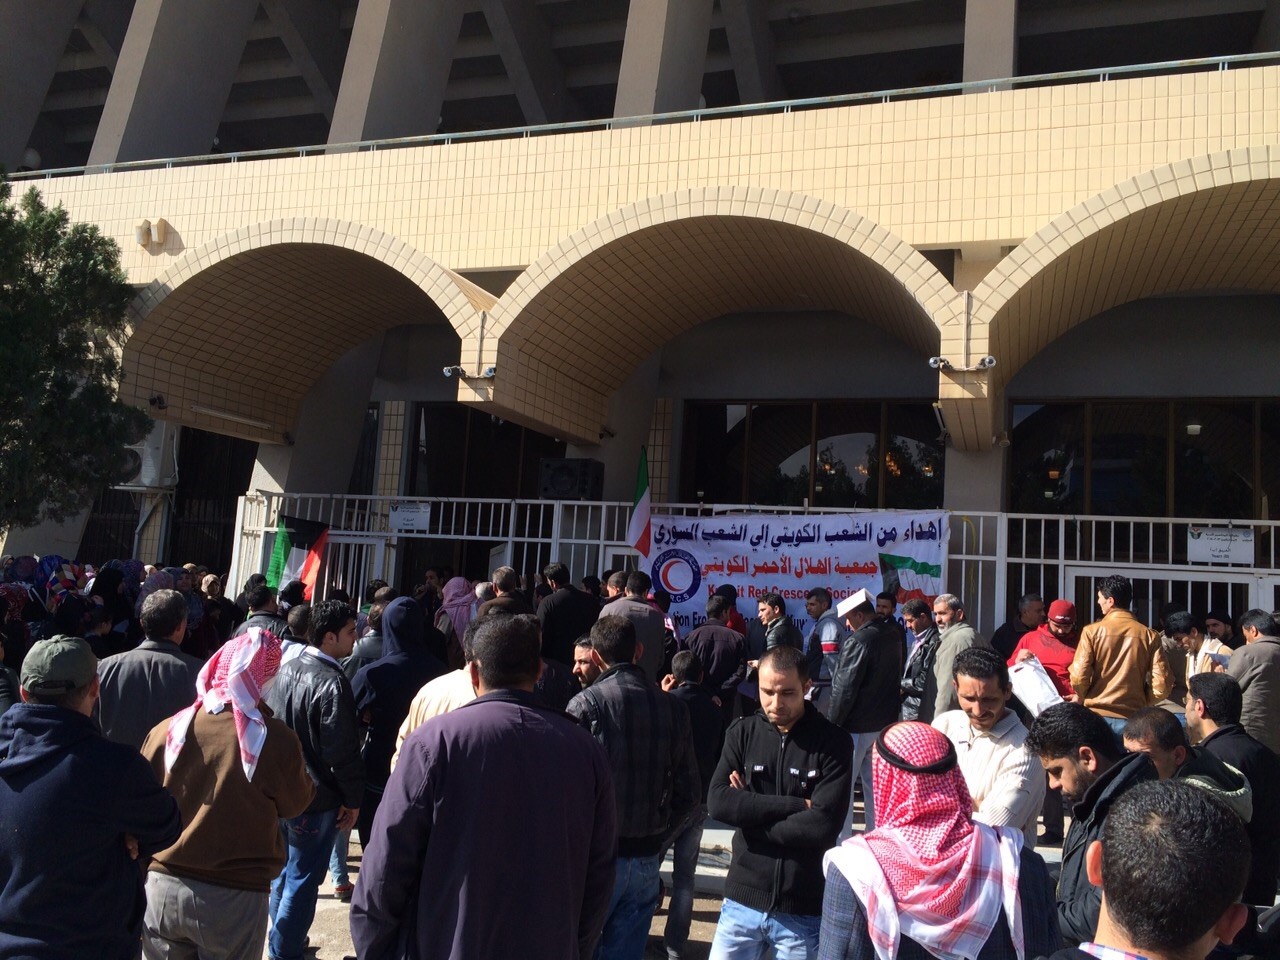 Kuwait Red Crescent Society hands out aid to Syrian refugees in Jordan's Irbid